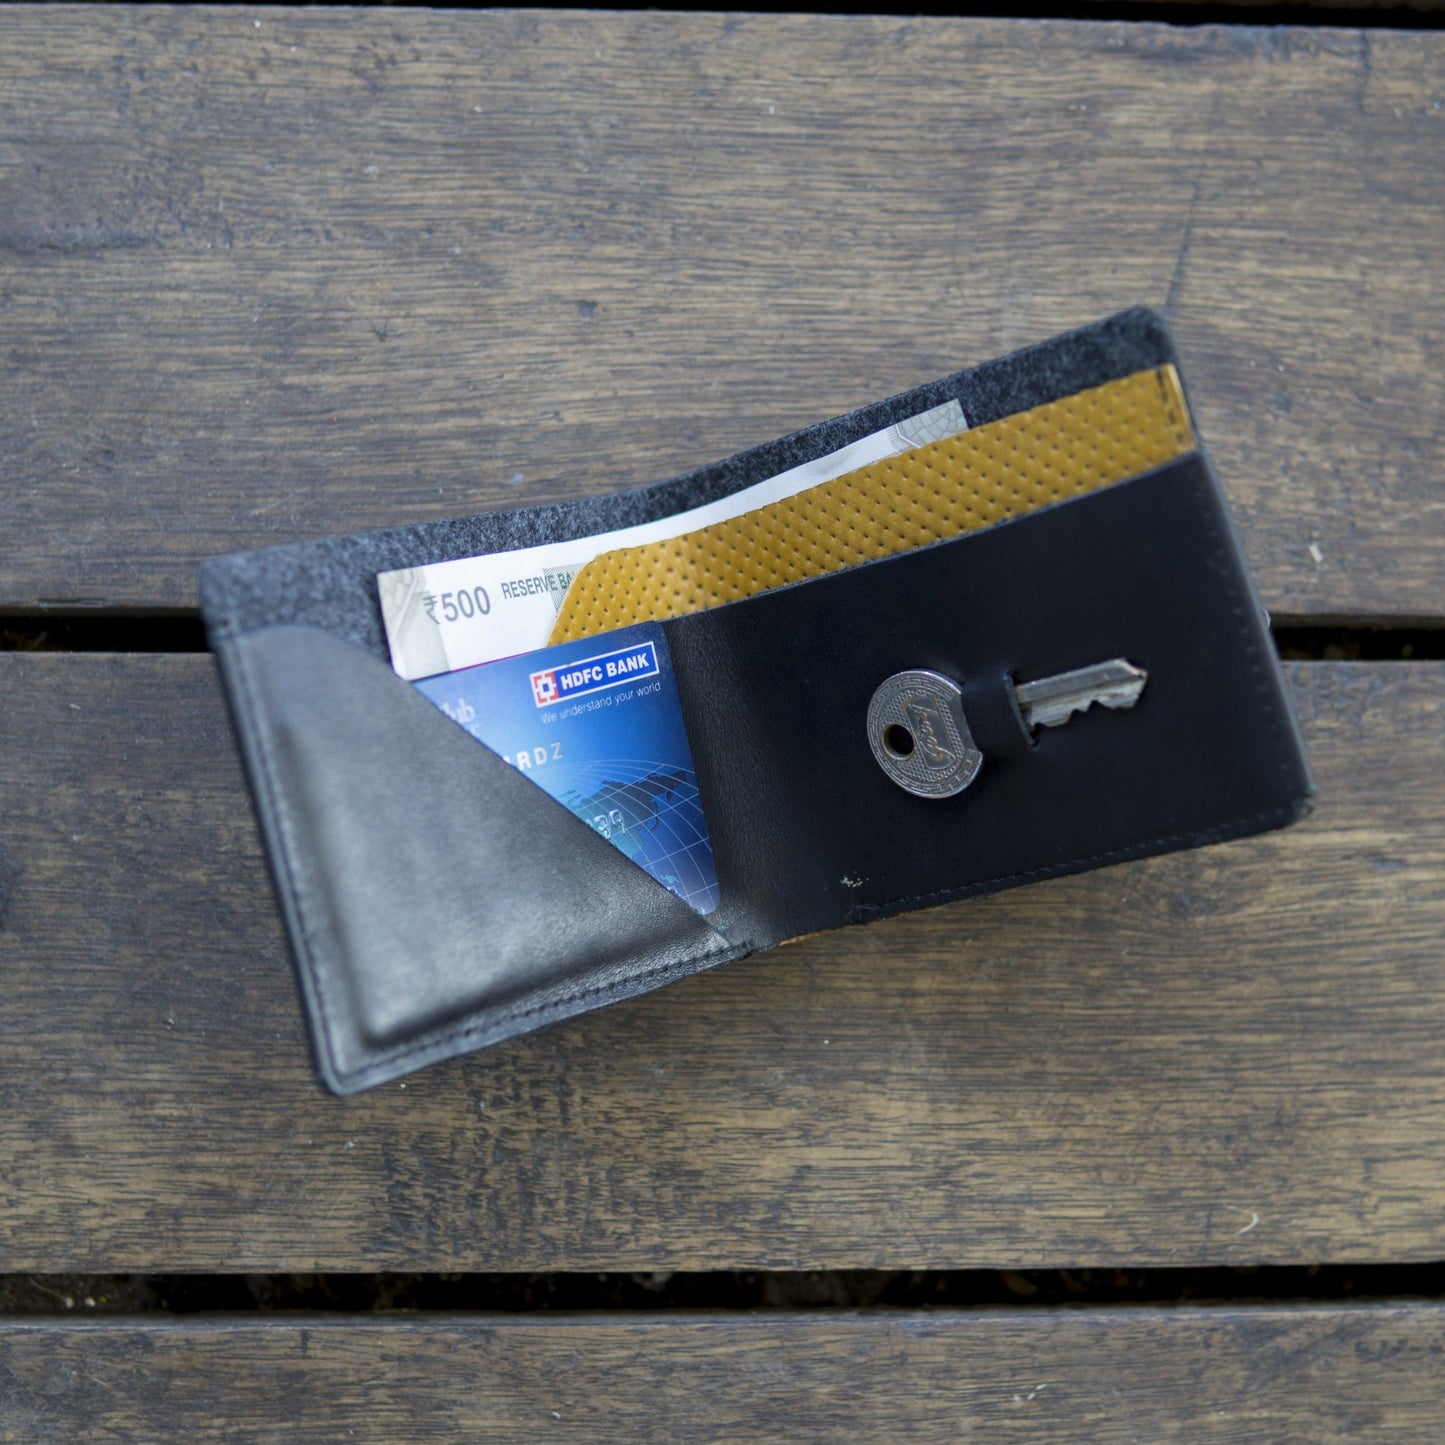 leather wallet card holder with key